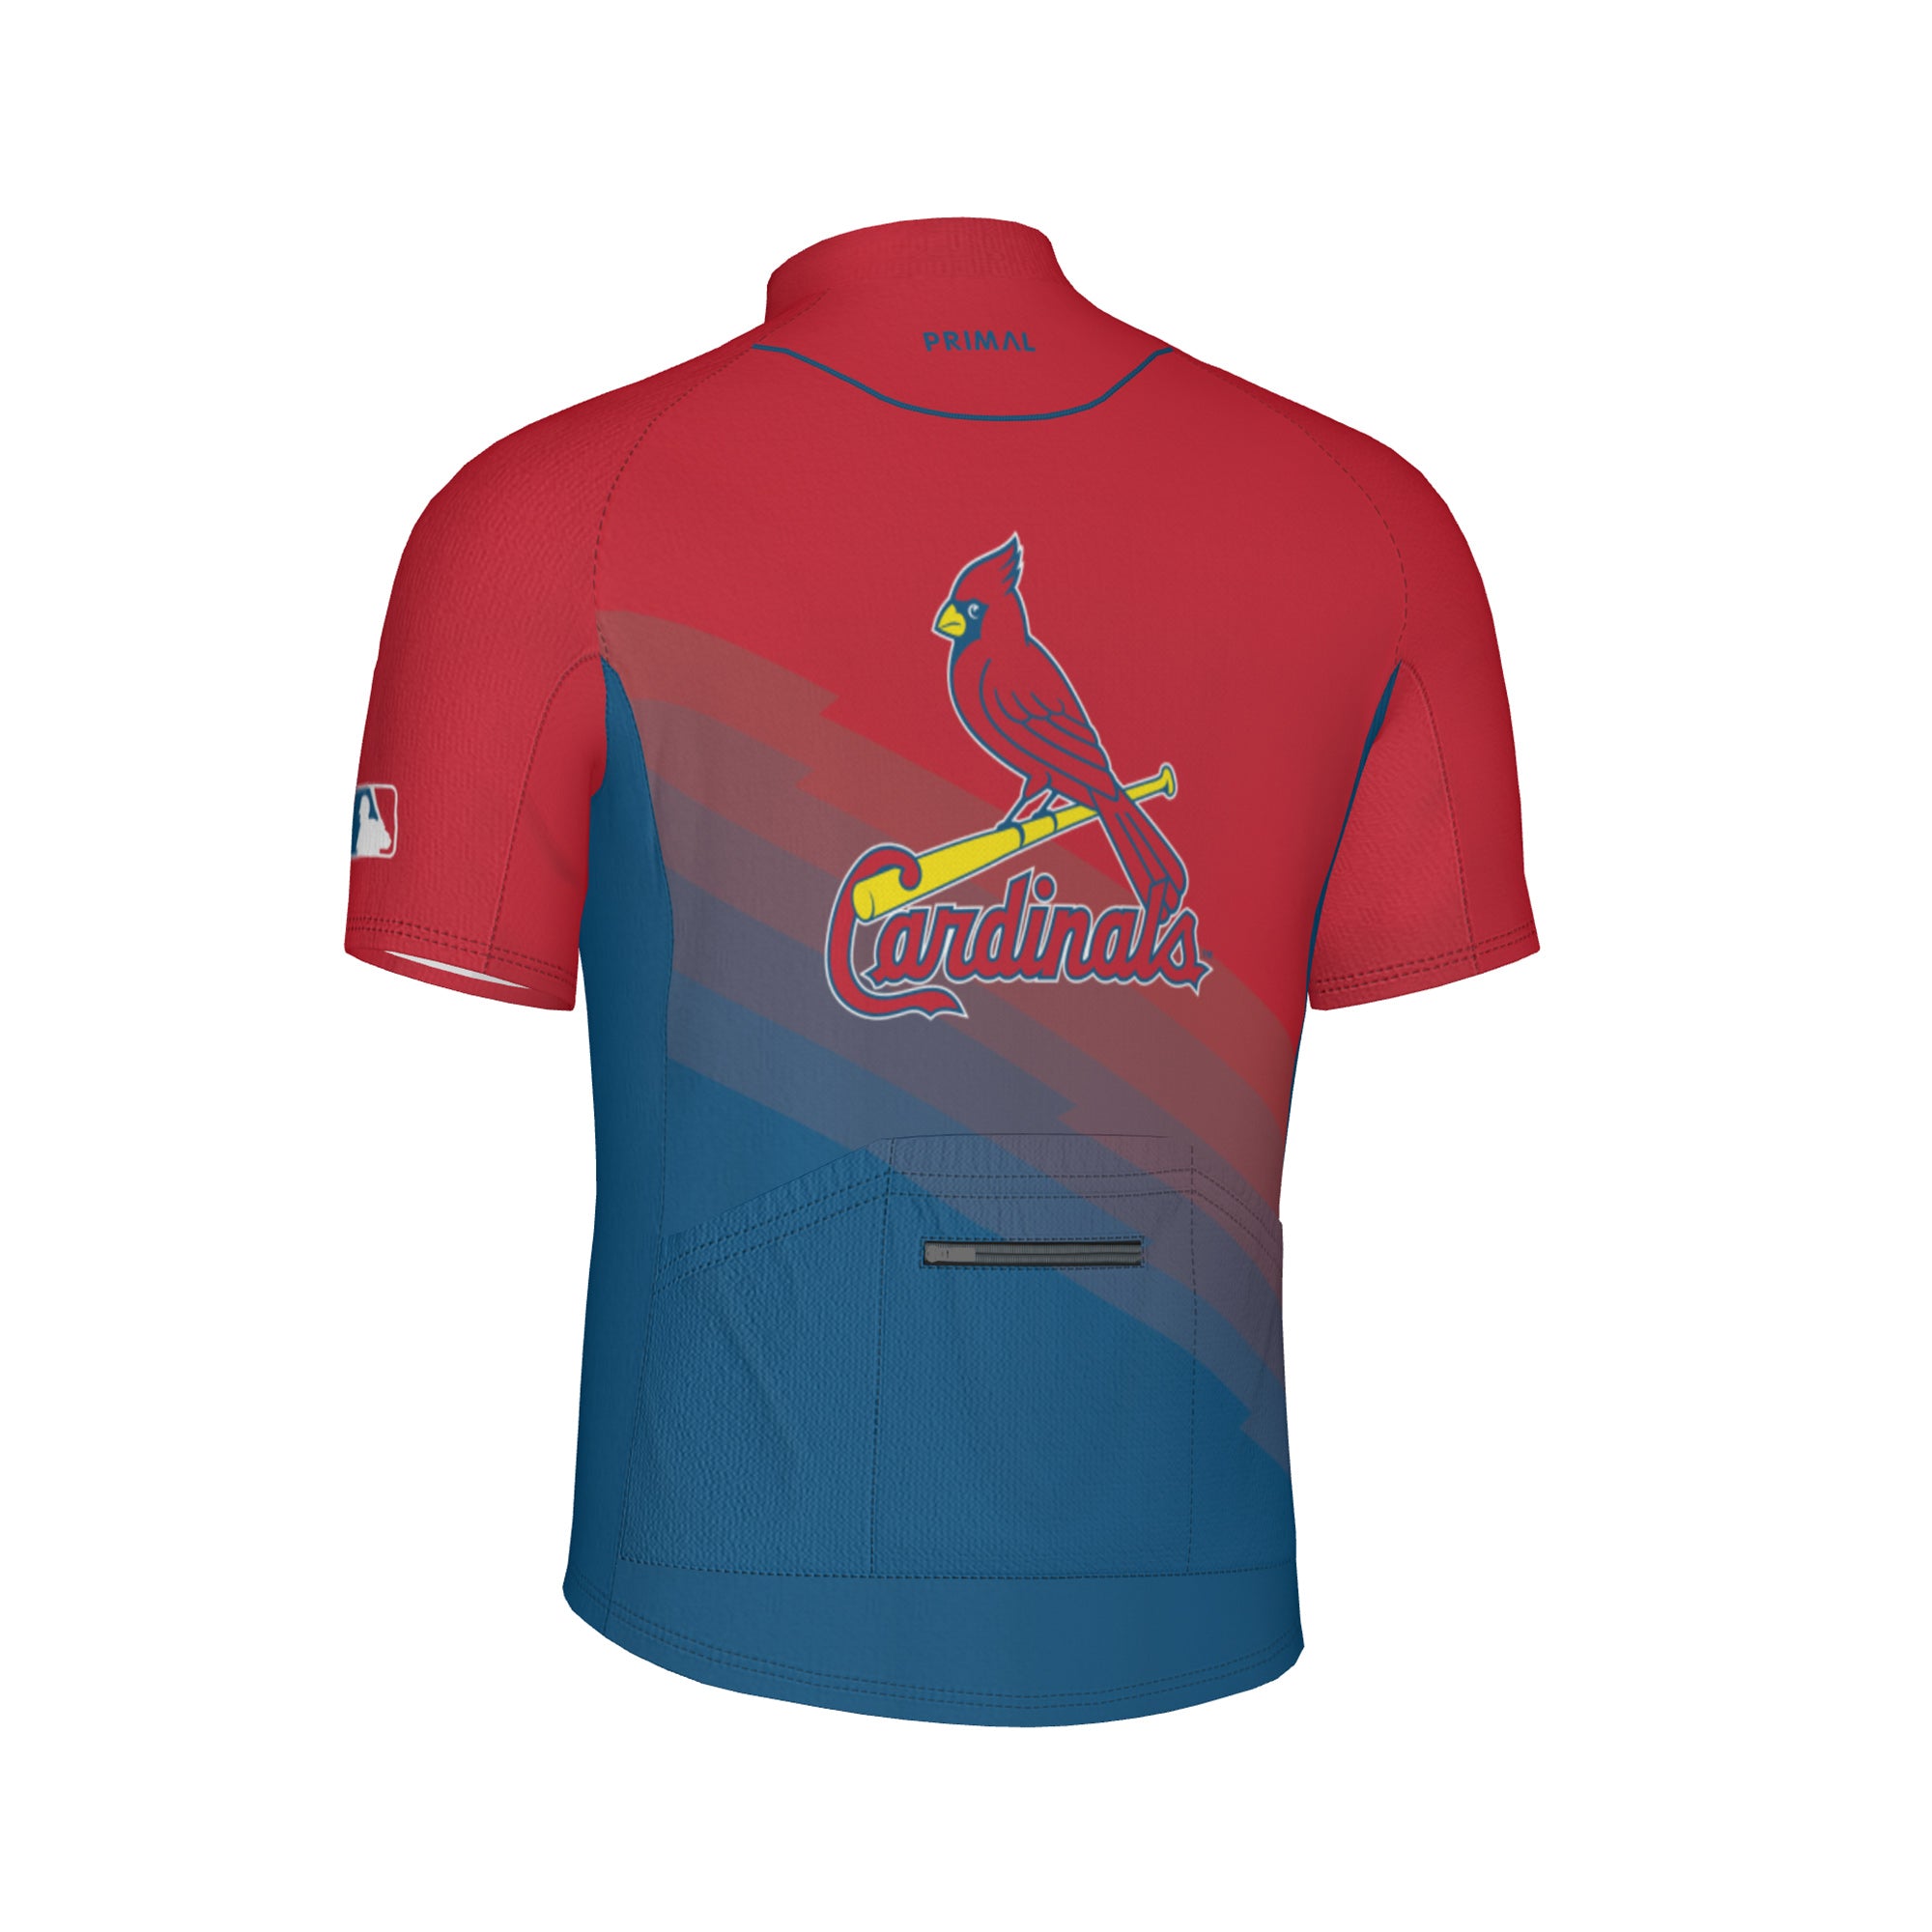 St. Louis Cardinals JERSEY - NEW, Size XL, SELL - clothing